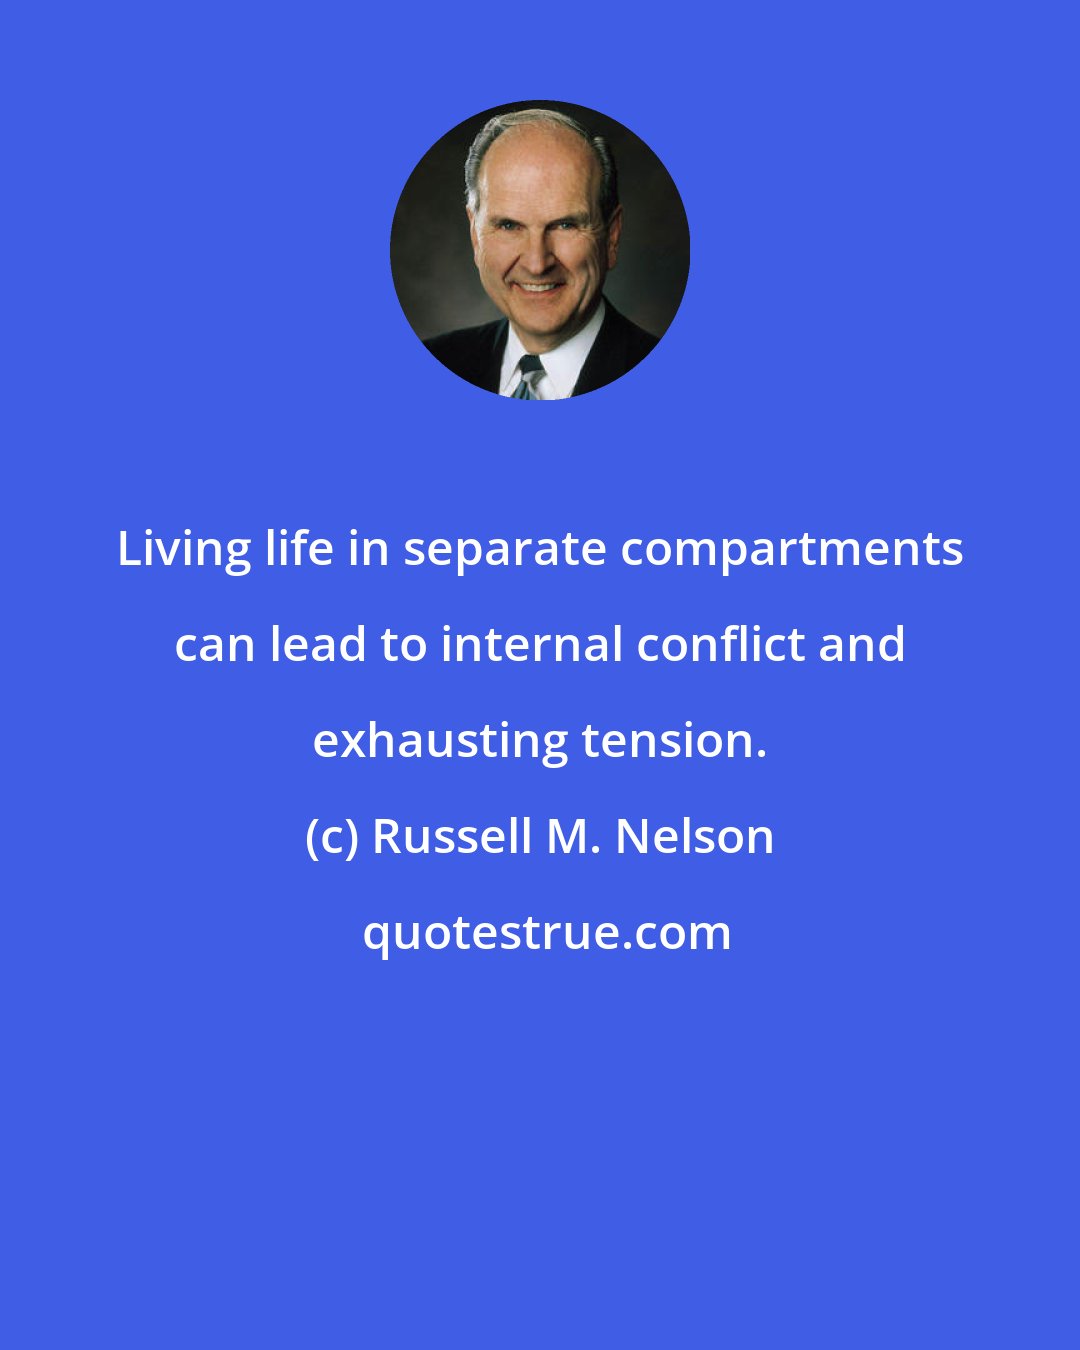 Russell M. Nelson: Living life in separate compartments can lead to internal conflict and exhausting tension.